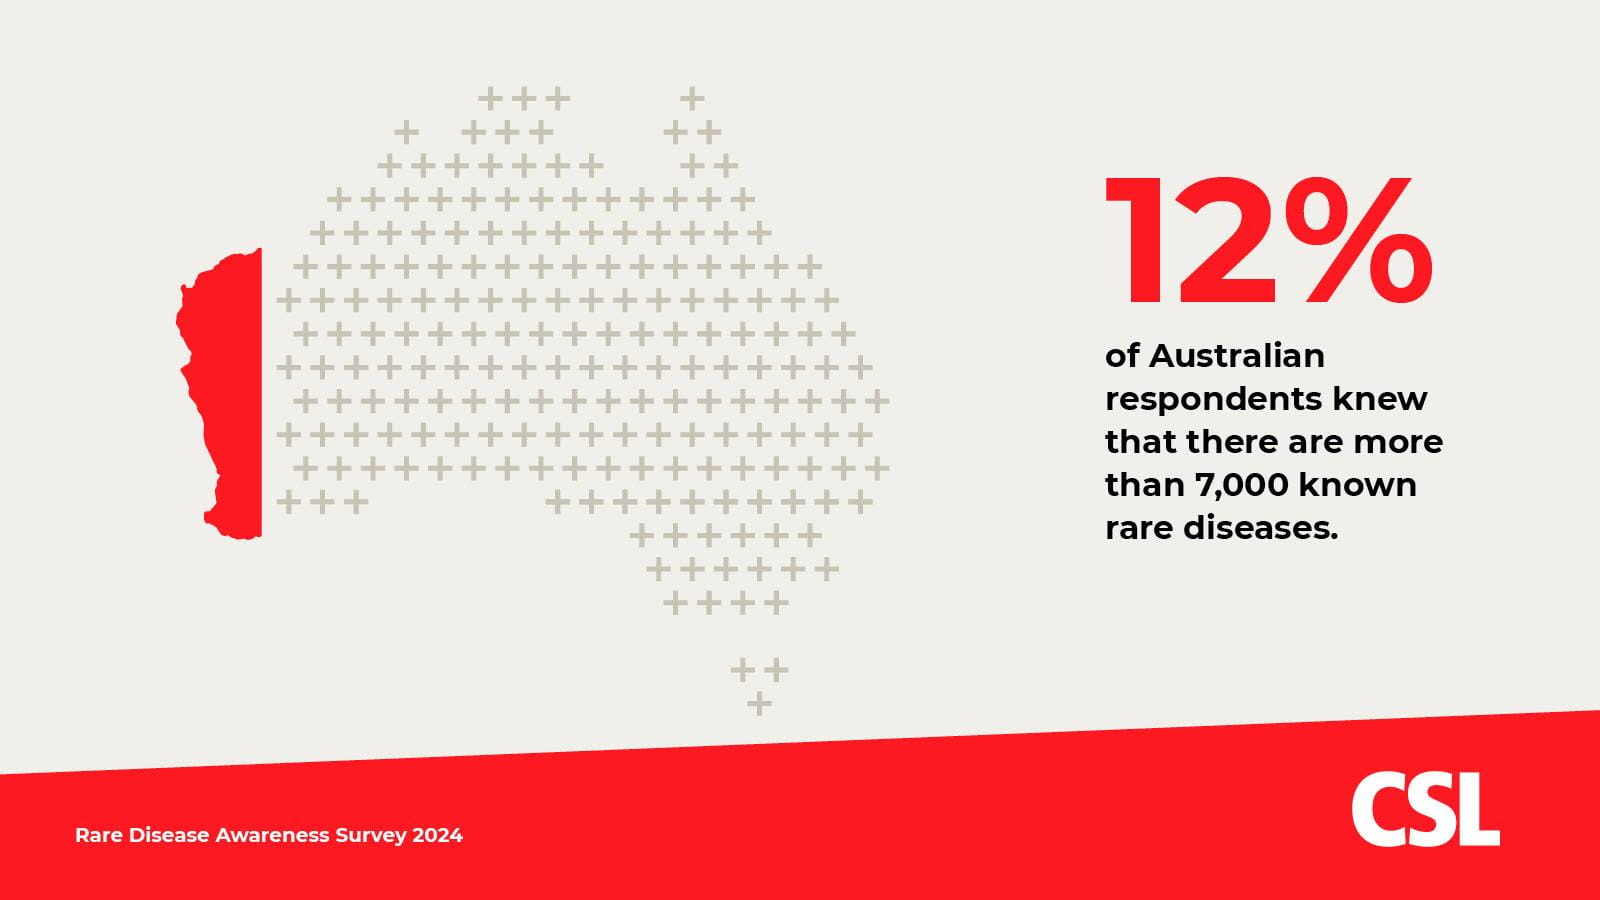 12% of Australian respondents knew that there are more than 7,000 known rare diseases